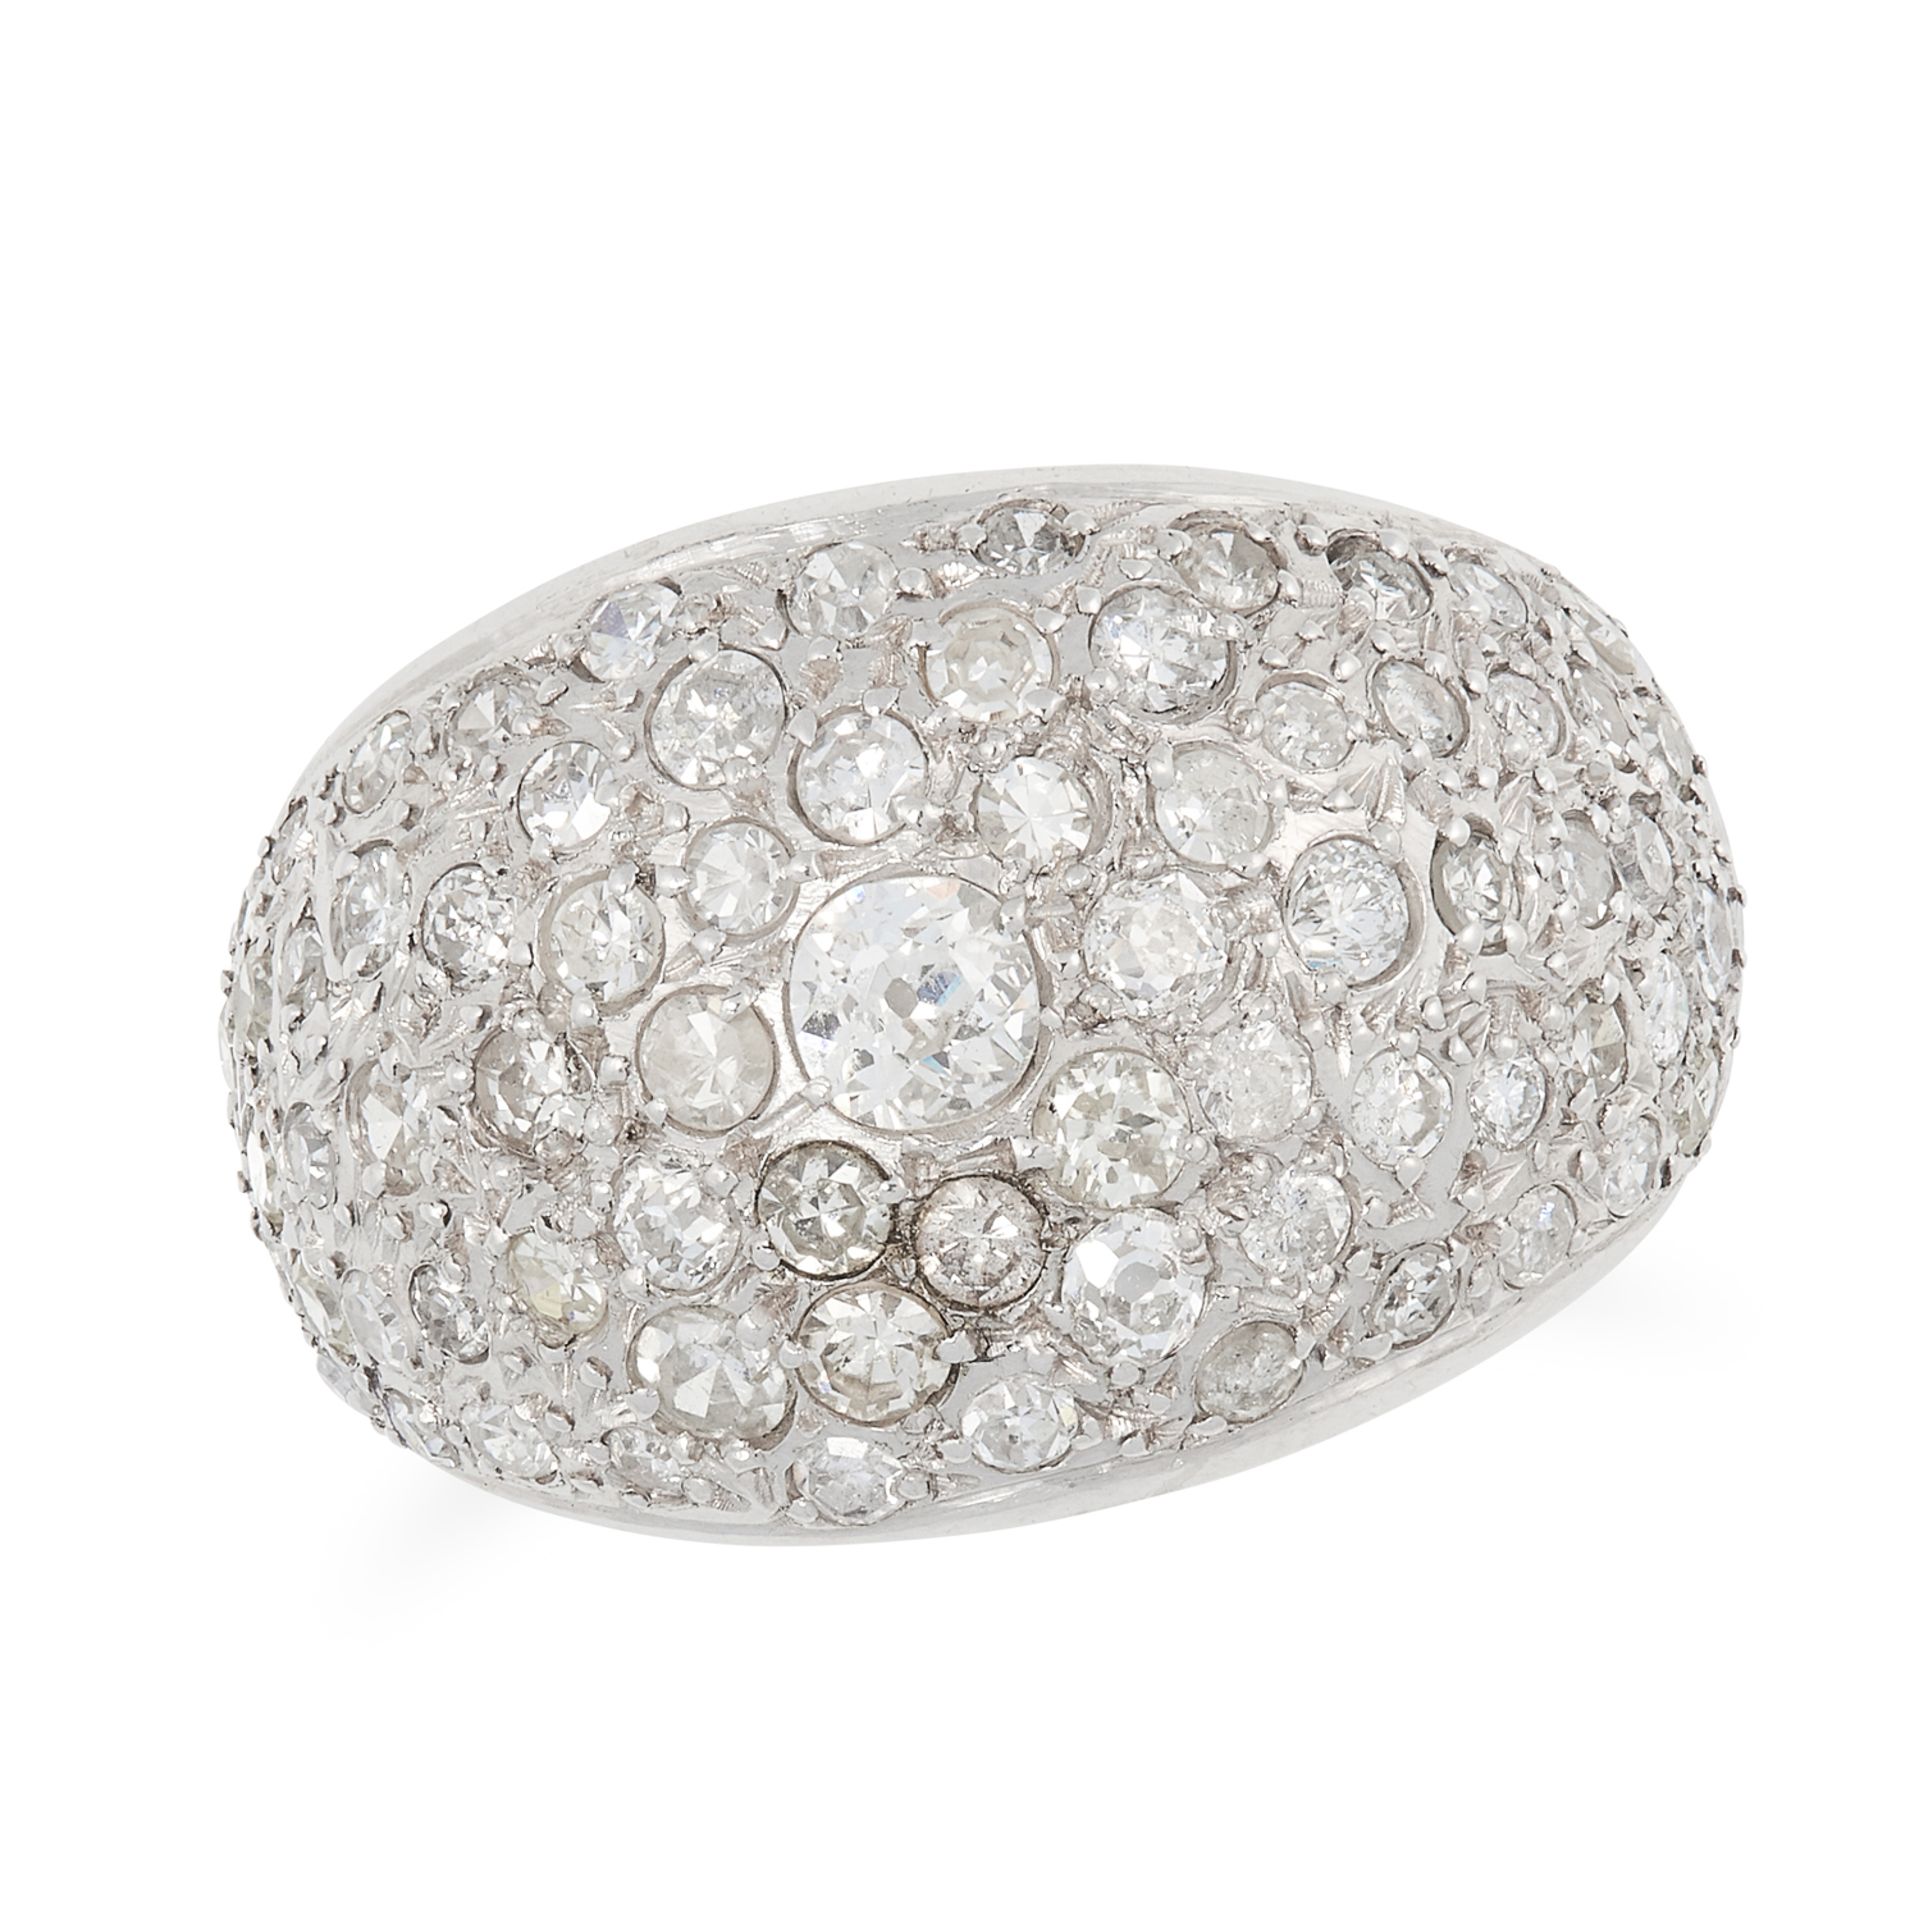 A DIAMOND BOMBE RING set with old and round cut diamonds, size O / 7, 9.4g.